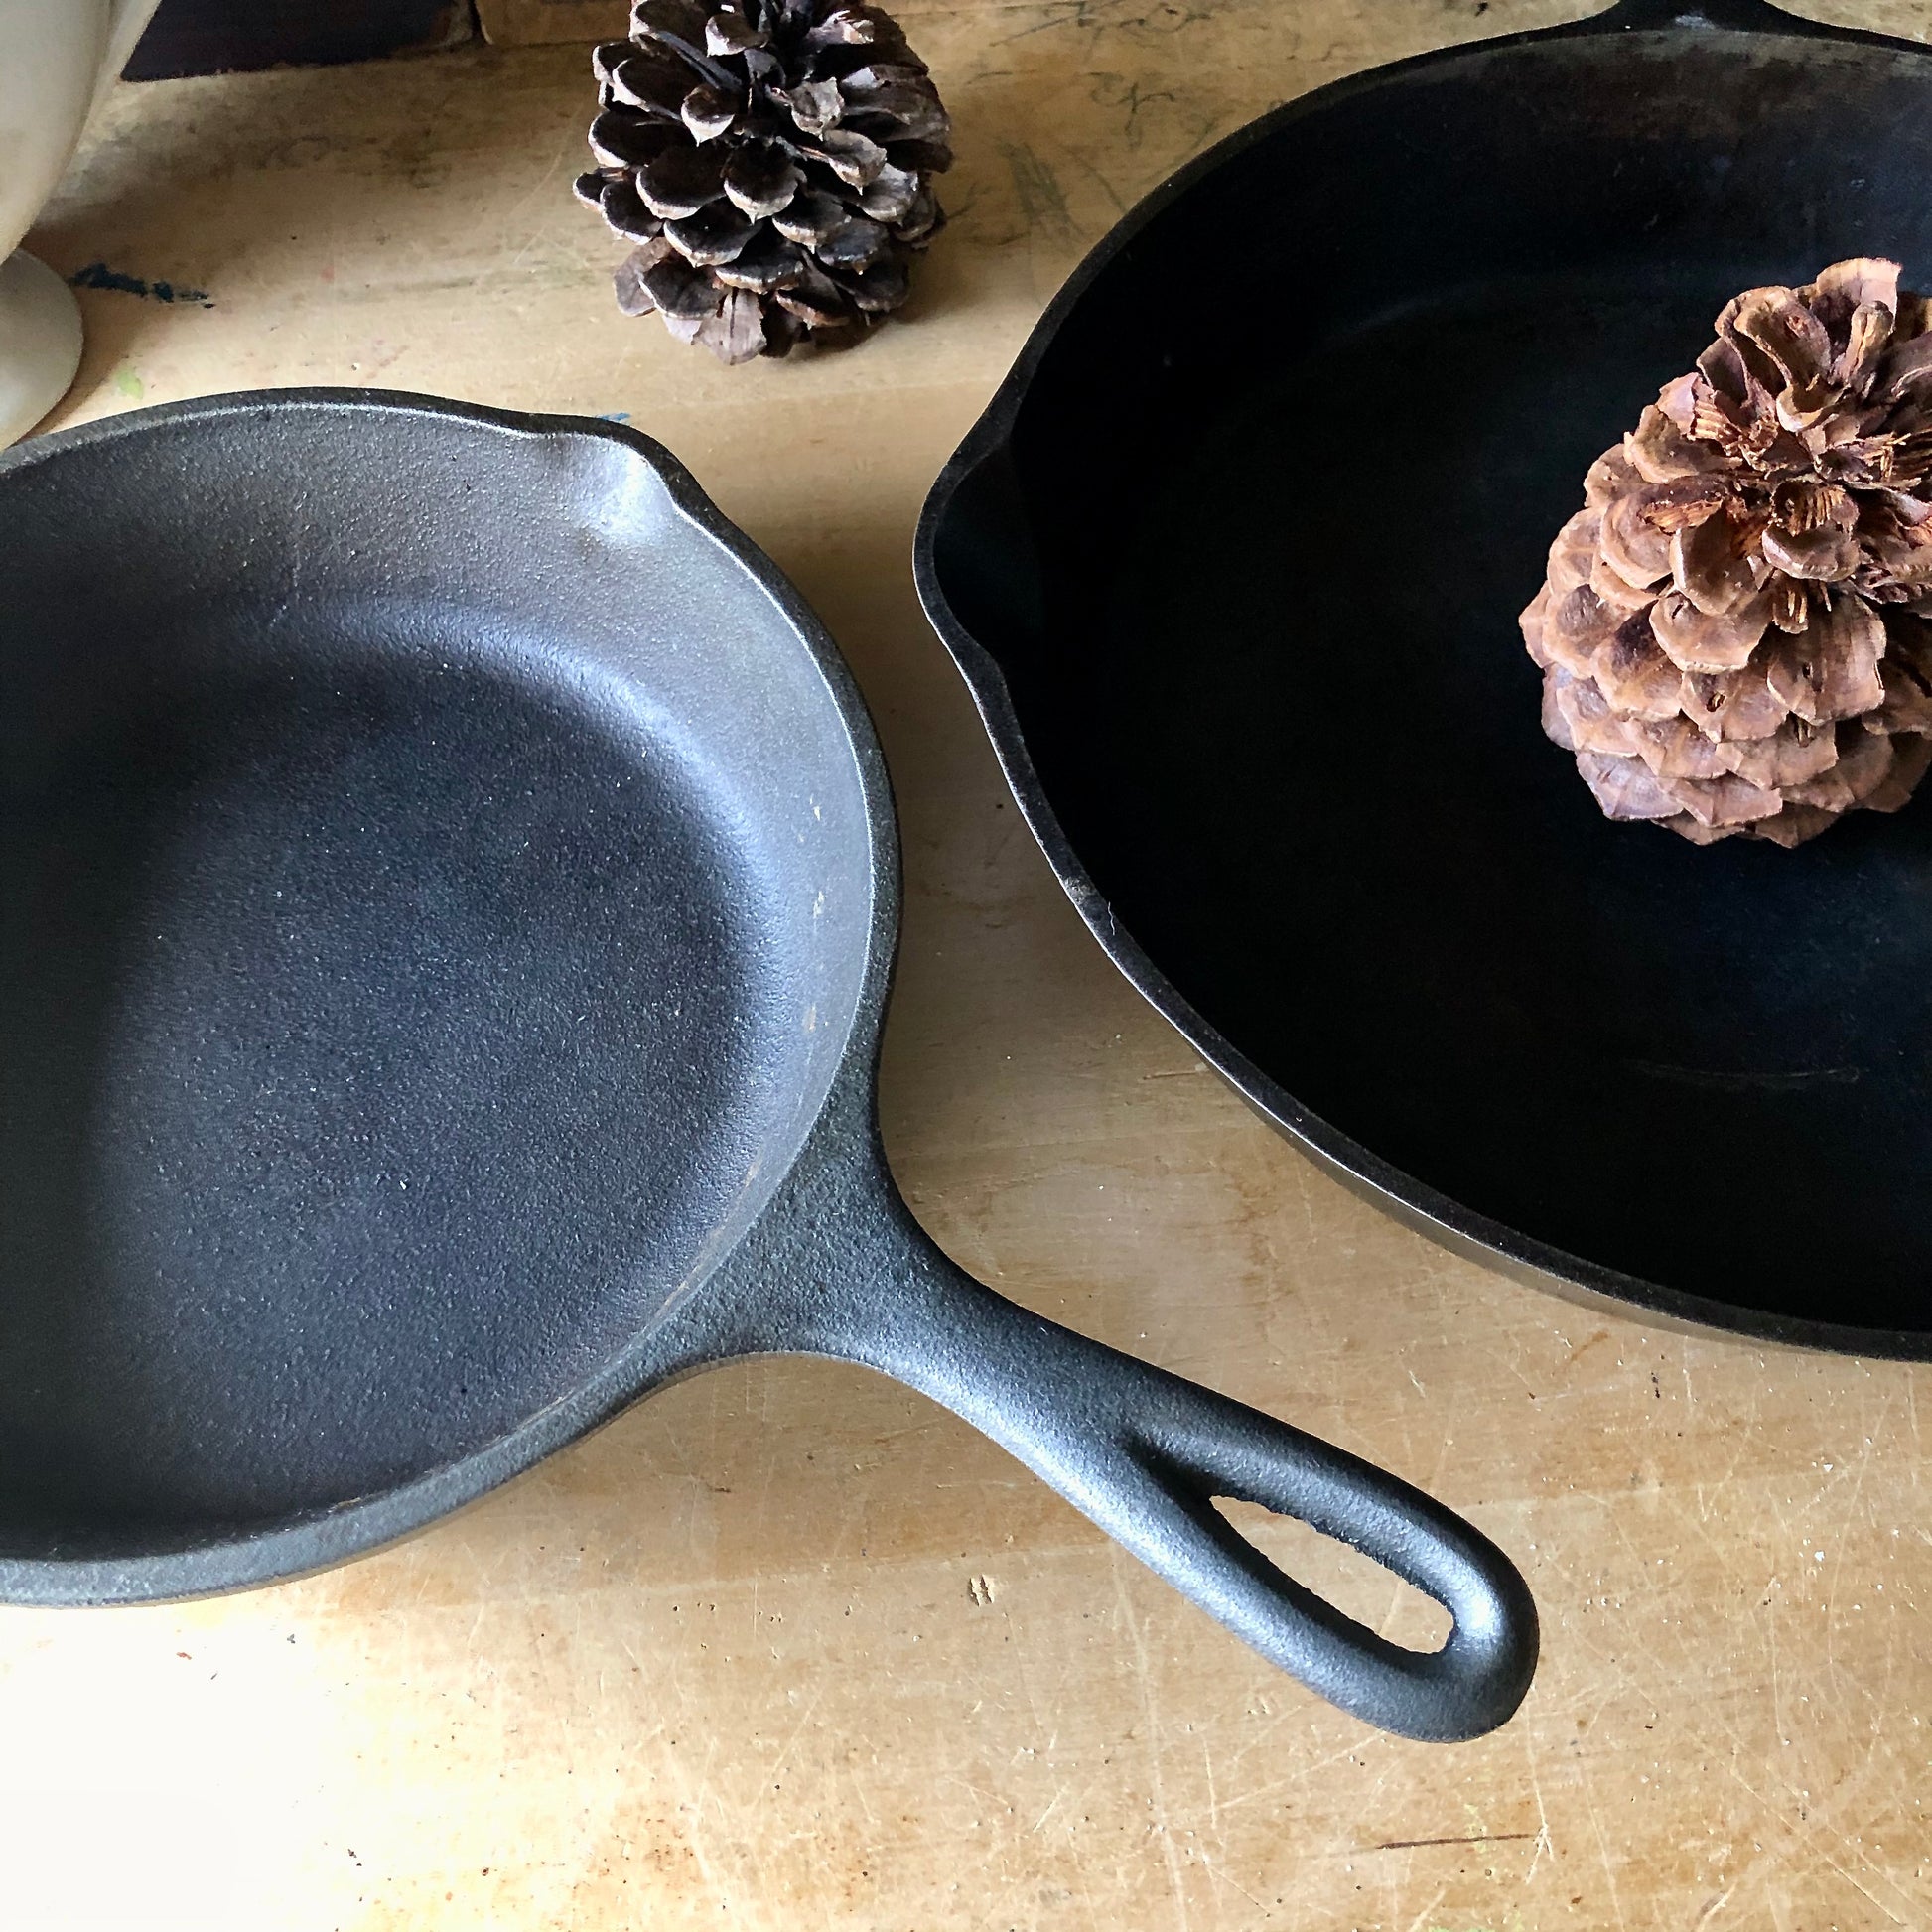 Overview: Lodge Cast Iron 8 Skillet 